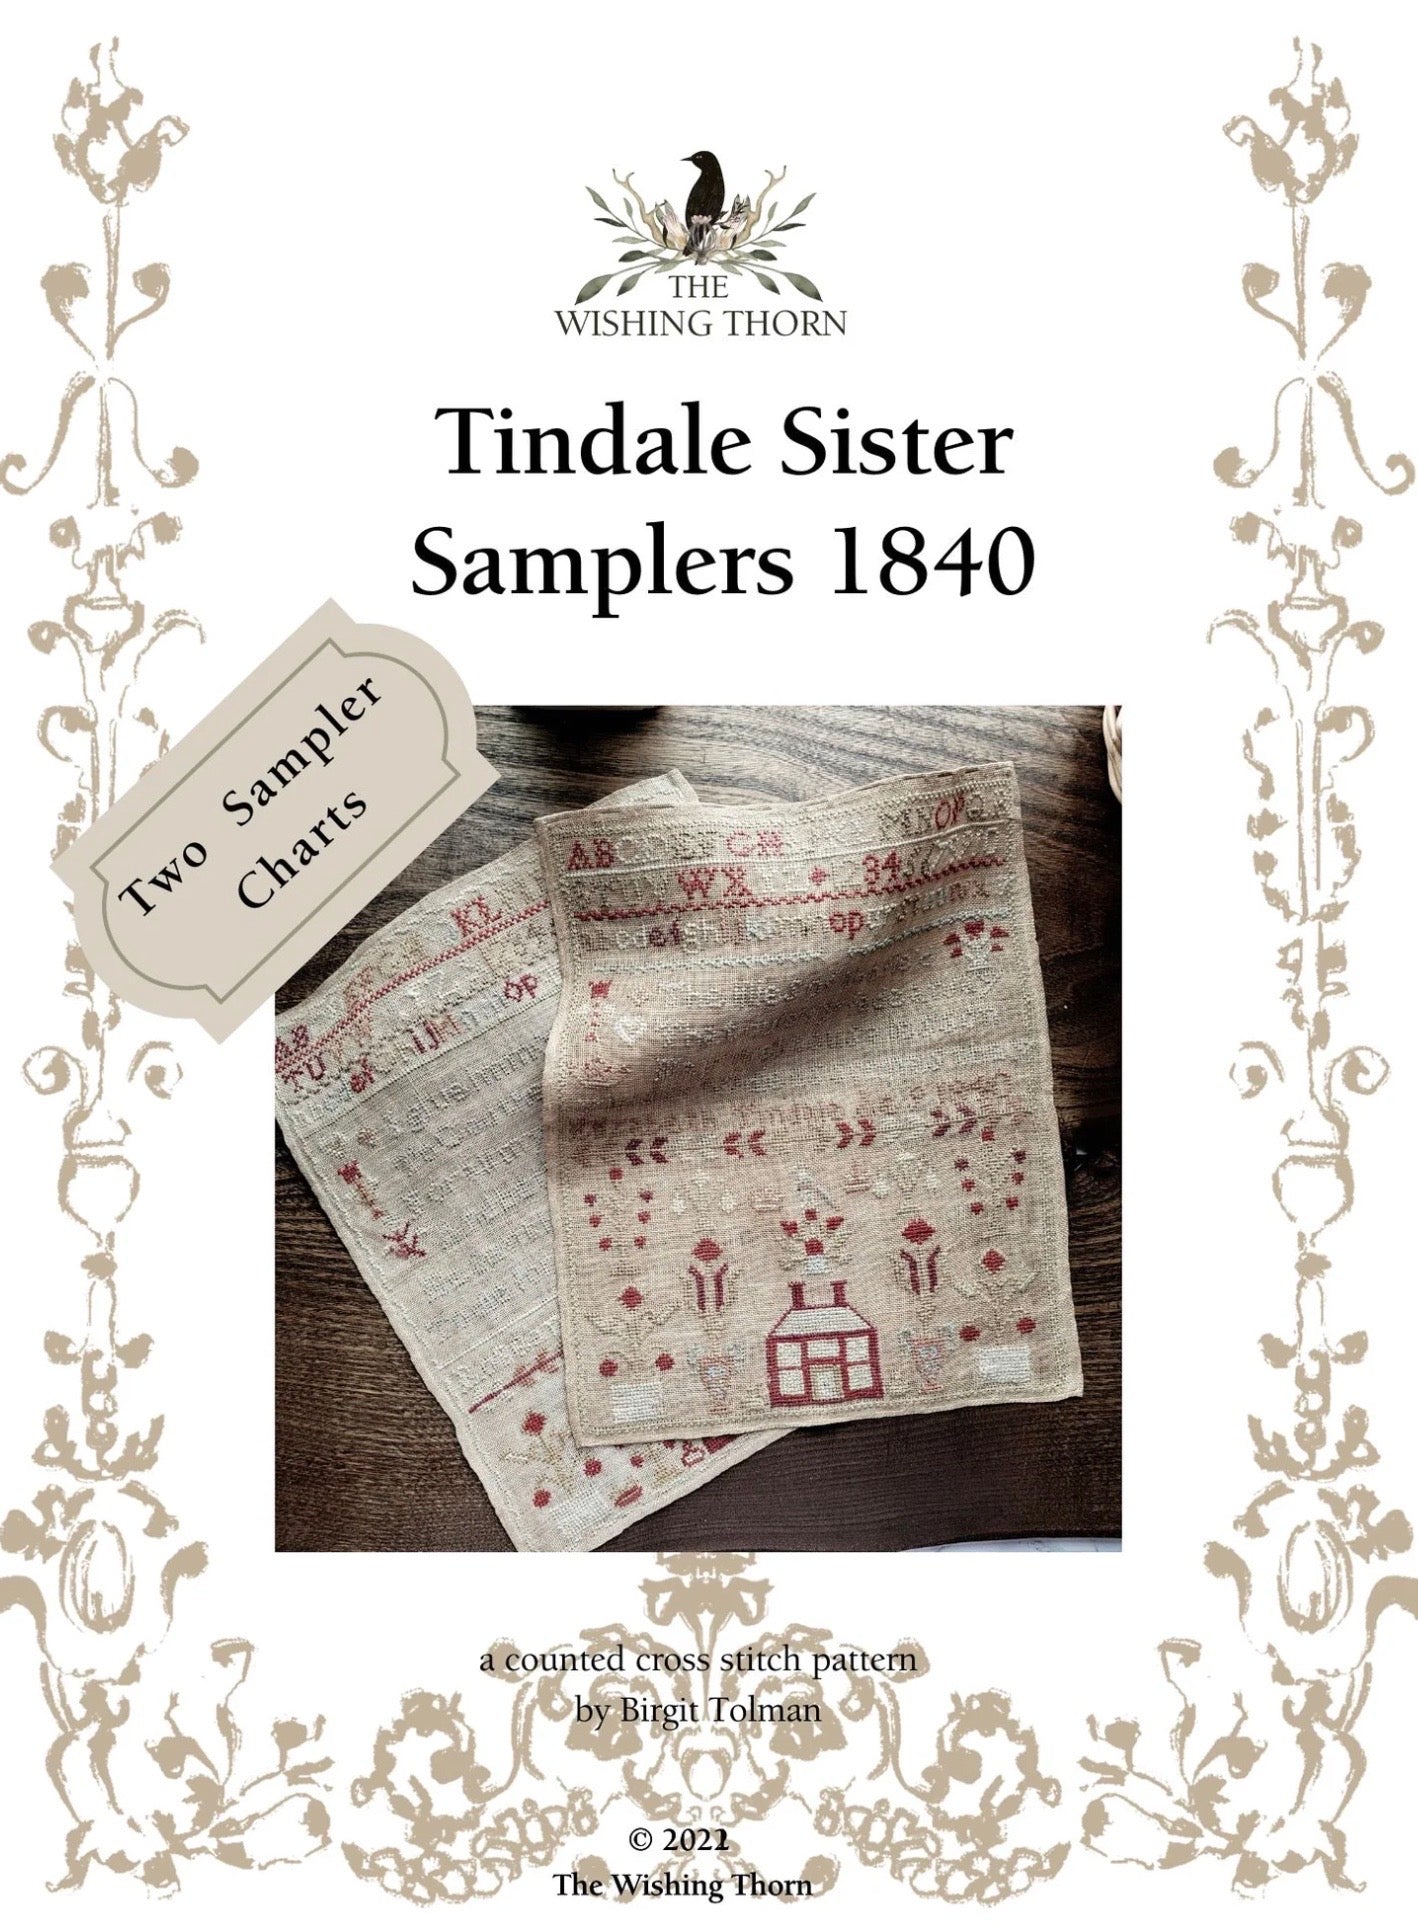 Tindal Sister Samplers 1840 (2 charts) by The Wishing Thorn